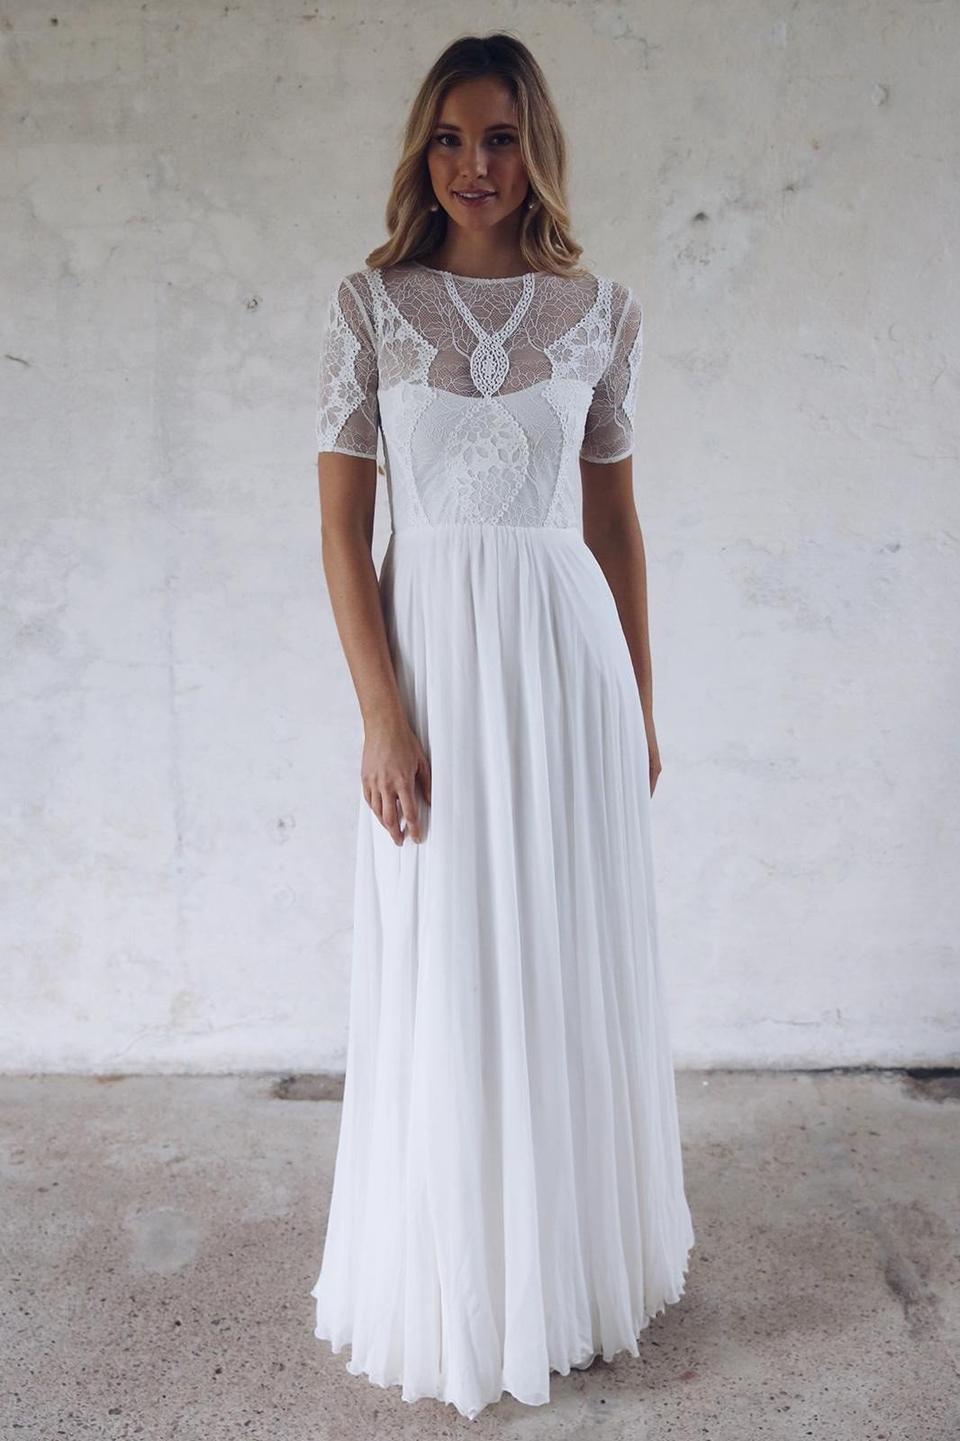 17 Beautiful VintageInspired Wedding Dresses hitched.co.uk hitched